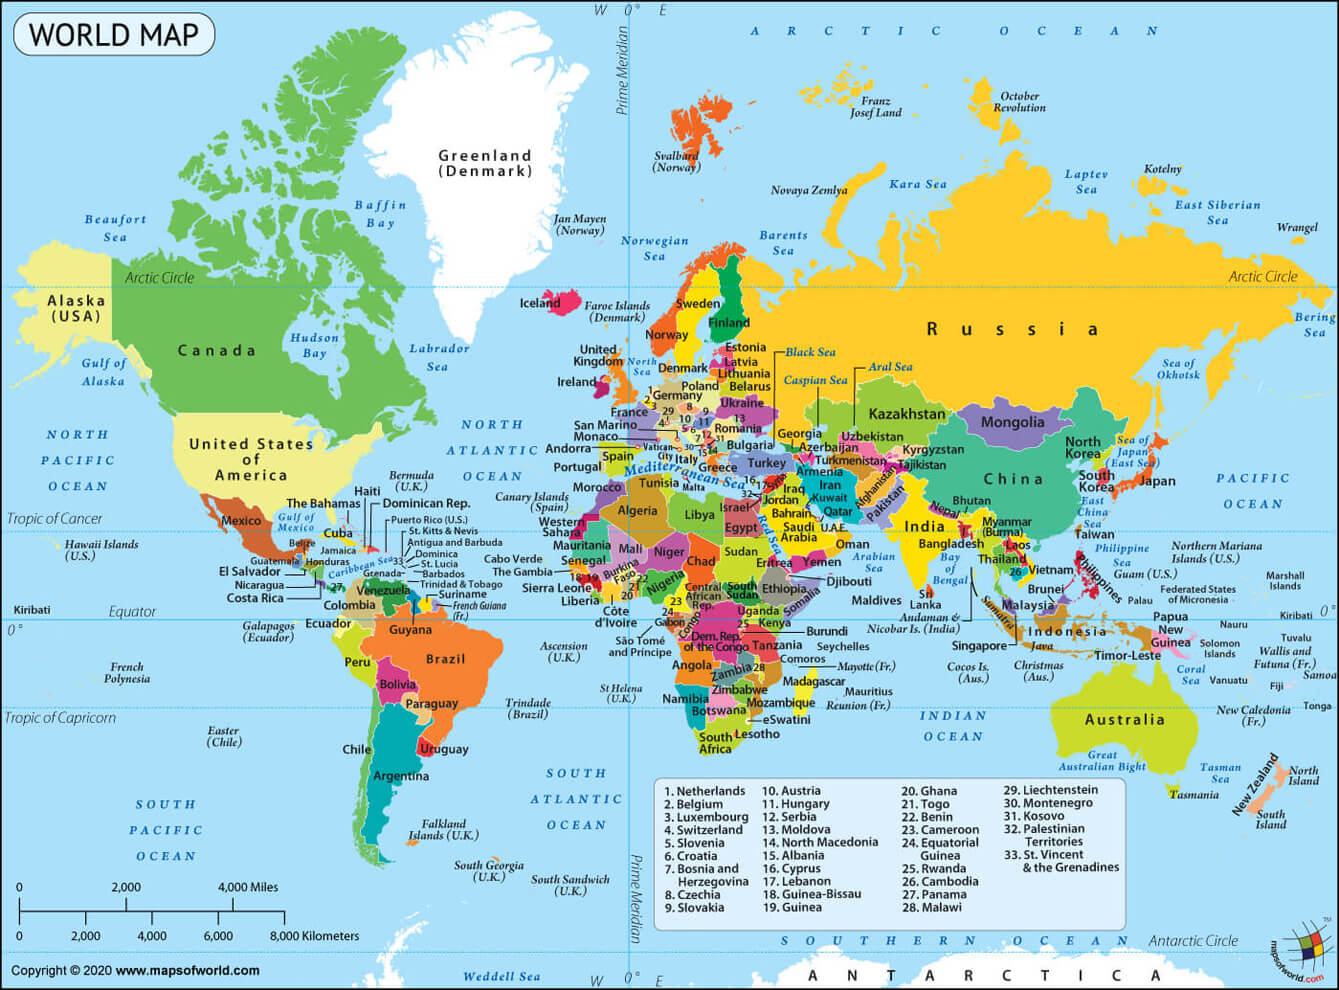 show me images of the world map World Map A Map Of The World With Country Names Labeled show me images of the world map